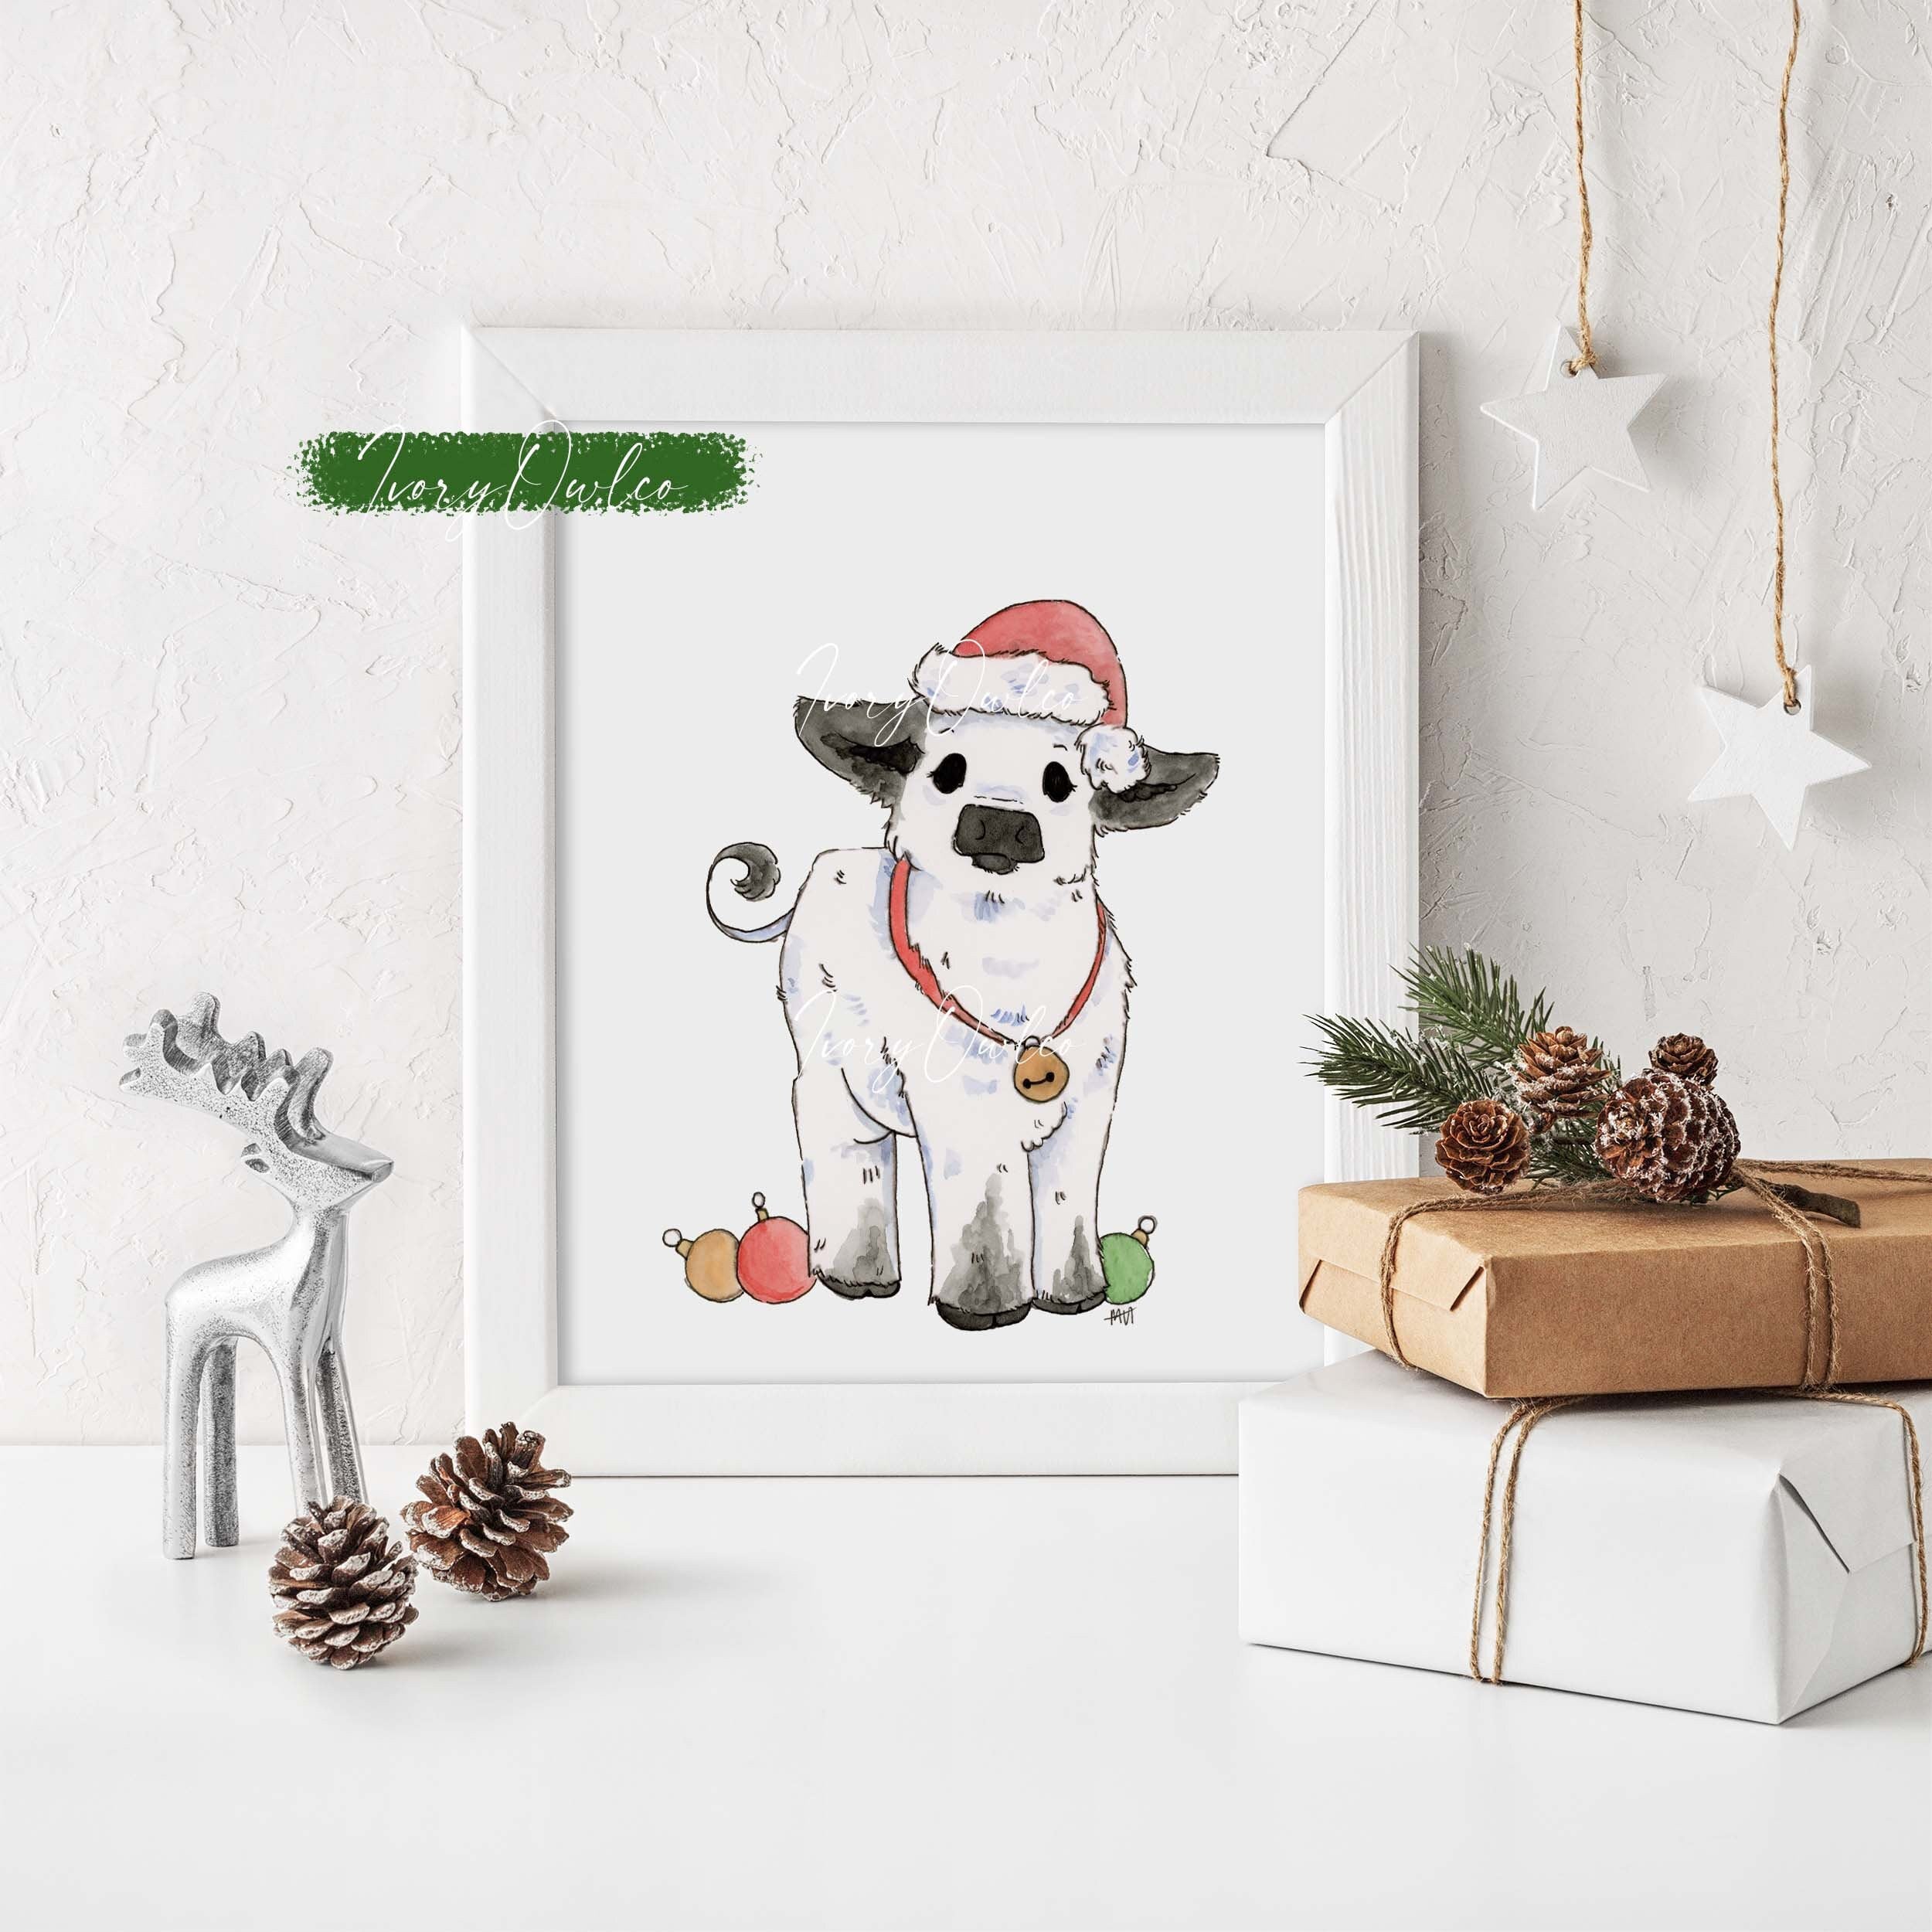 486 Pcs Funny Cow Wall Decor Room Decor Cute Cow Prints Decor Cow Gifts Cow  Stickers Cow Print Vinyl Wall Art Decals Animal Wall Decals for Bedroom